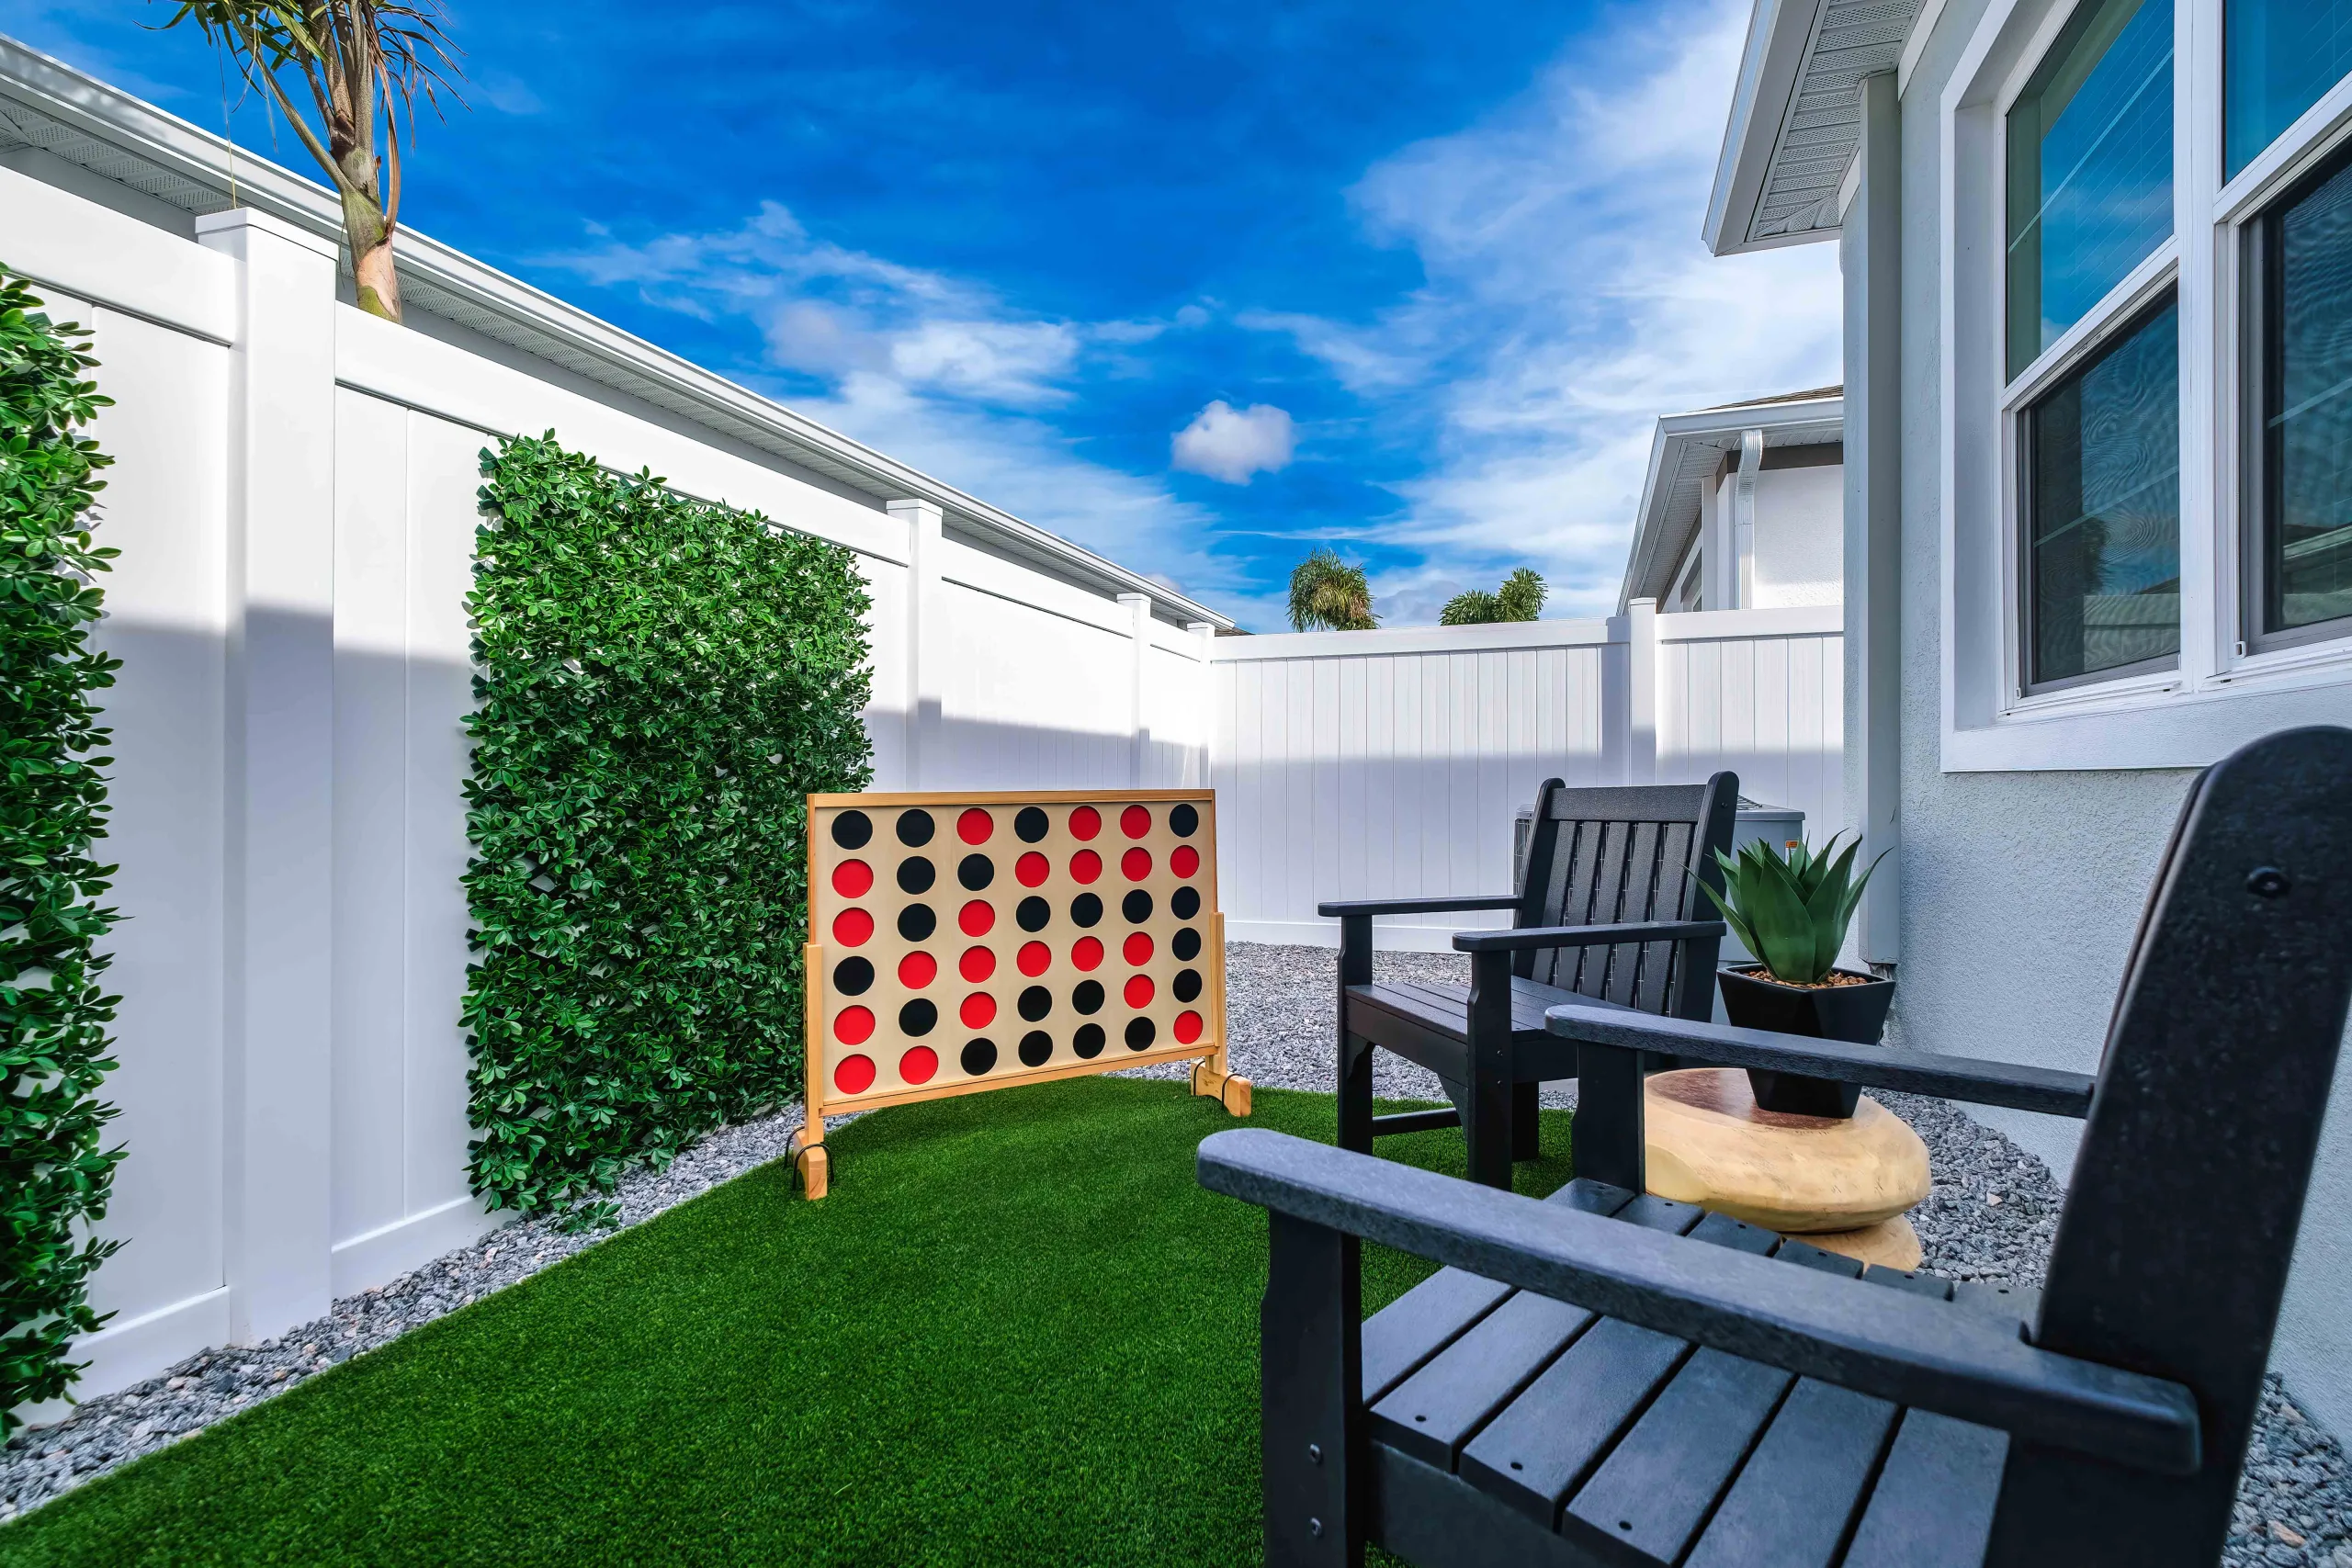 A beautiful white fenced Florida backyard scape with artificial turf, a mature palm tree, seating, a grill, and a patio, on a beautiful breezy sunny day.